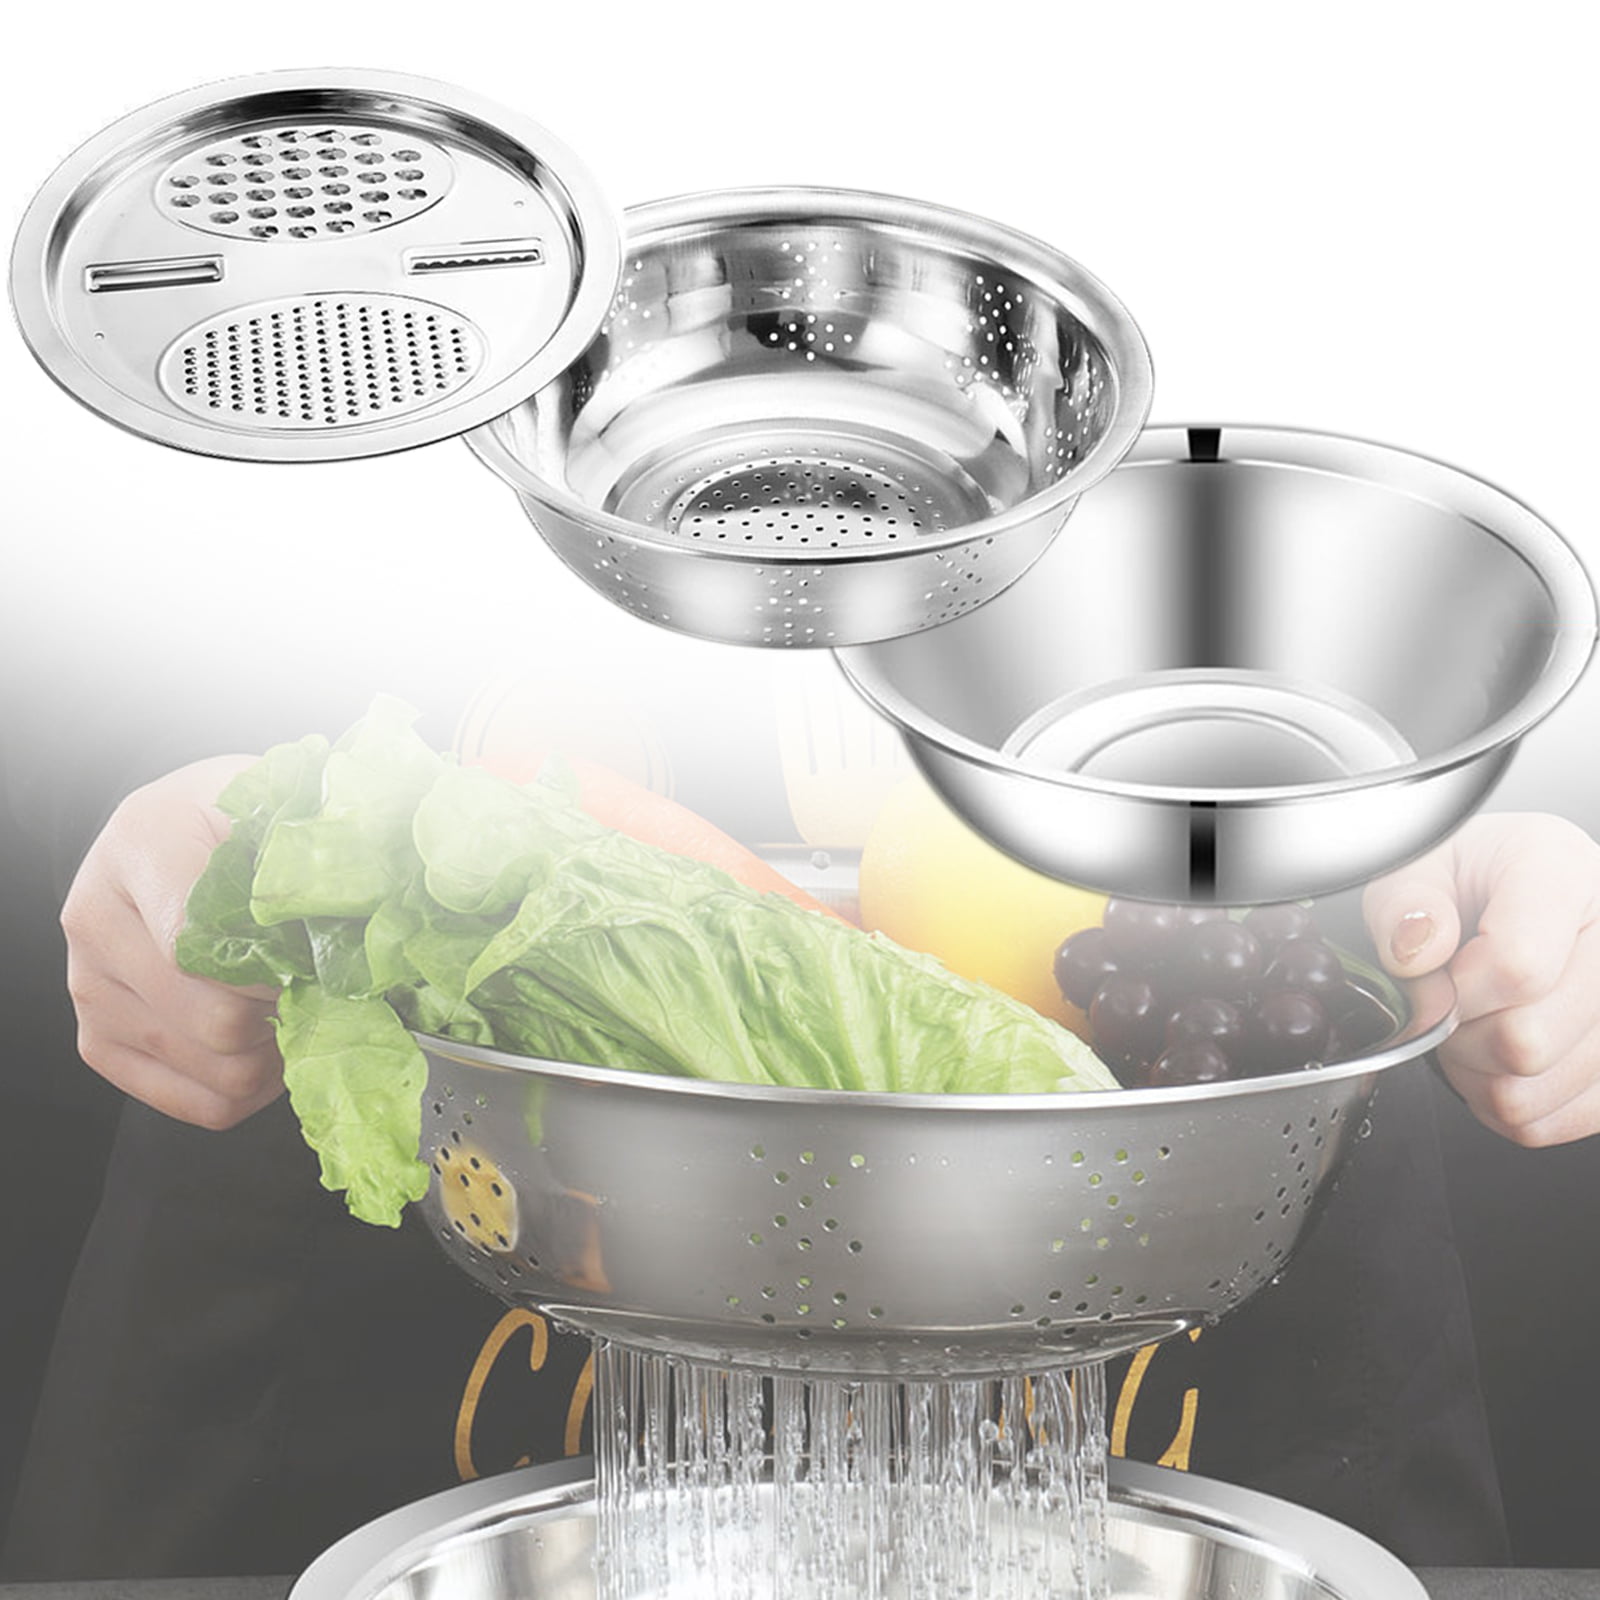 Kitchen Portable Multifunctional Stainless Steel Basin with Filter/Grater/Bowl 